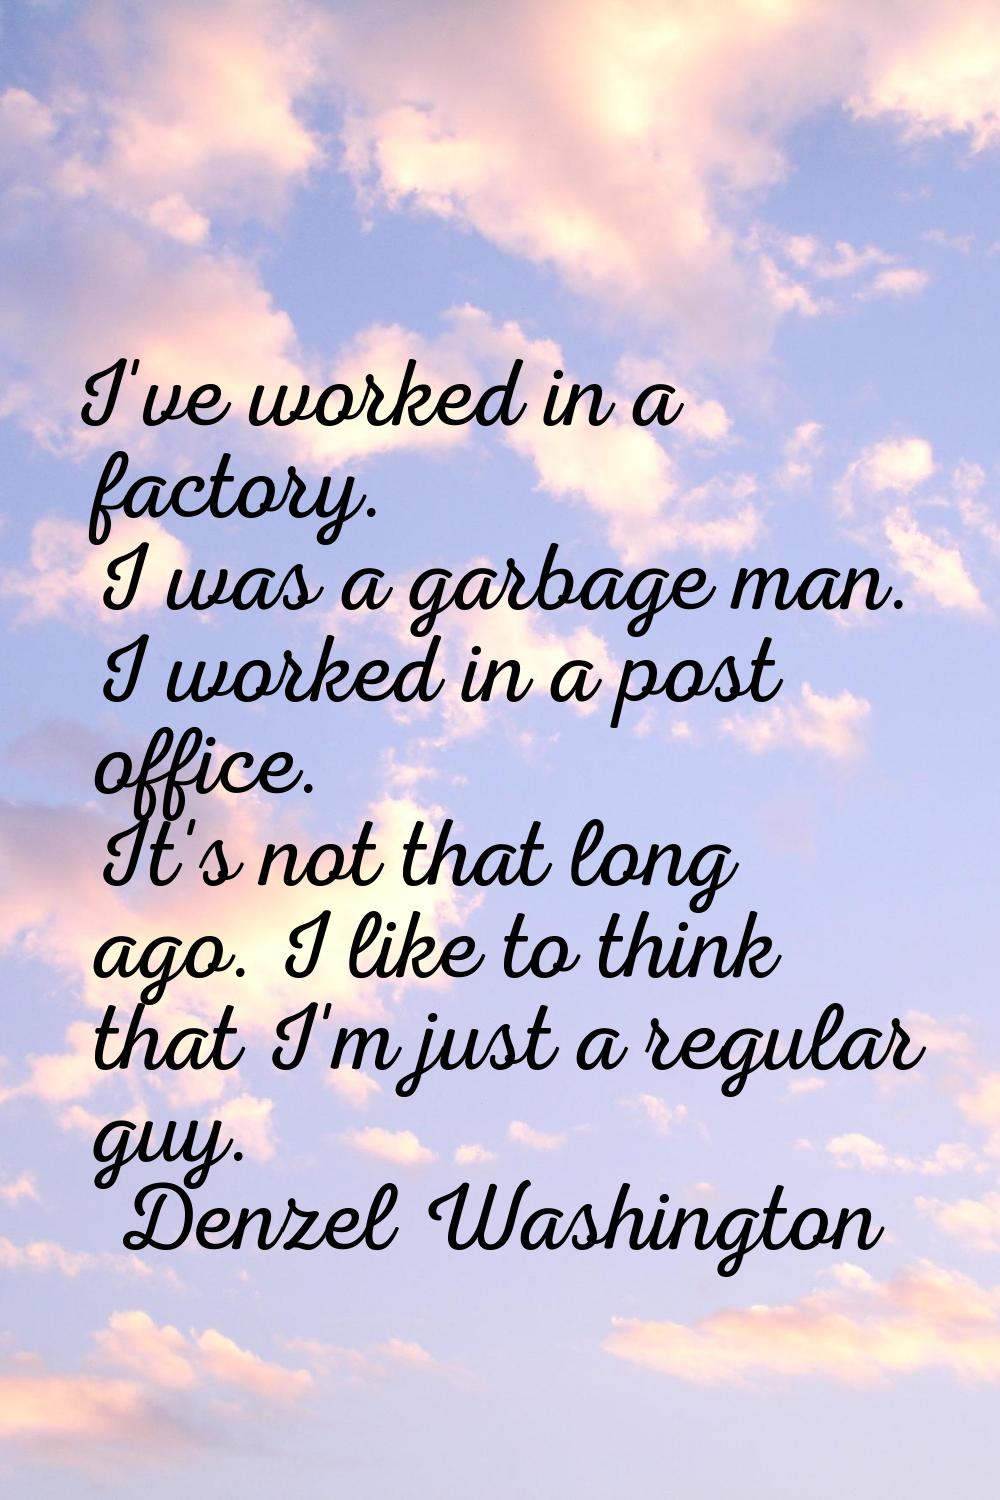 I've worked in a factory. I was a garbage man. I worked in a post office. It's not that long ago. I